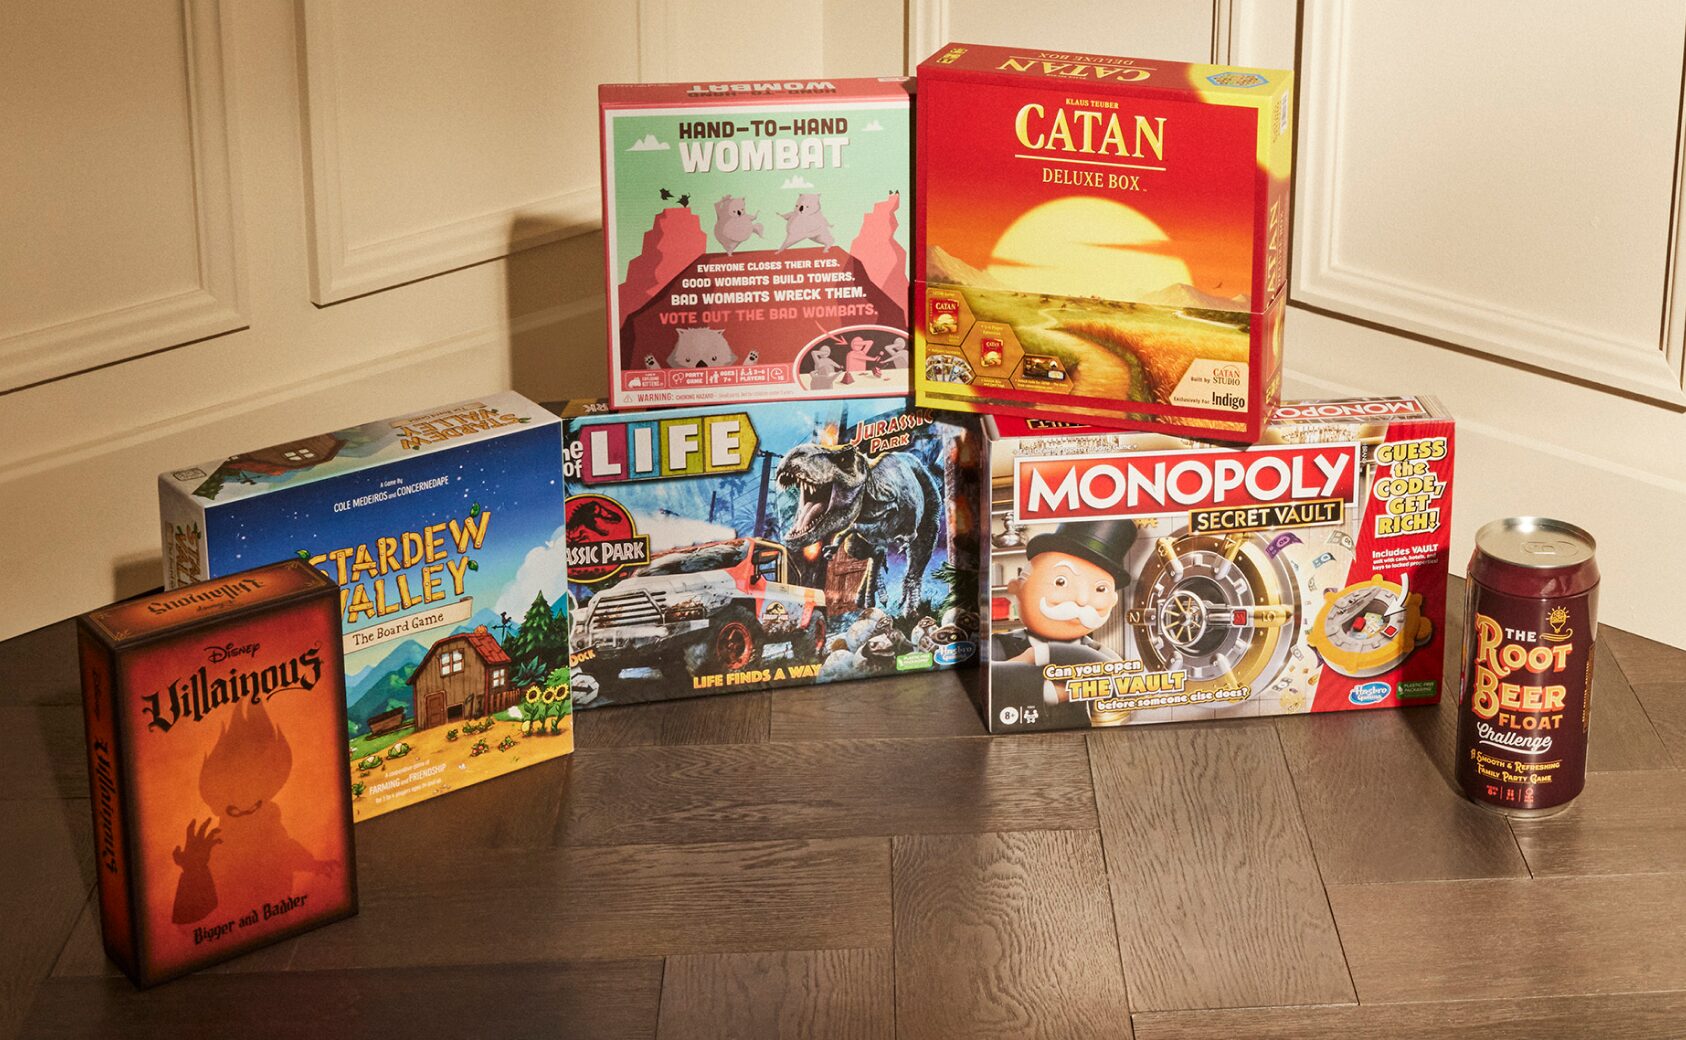 Games & puzzles from brands like Disney Villainous, Stardew Valley, The Game of Life, Hand-to-Hand Wombat, Settlers of Catan, Monopoly and The Root Beer Float.